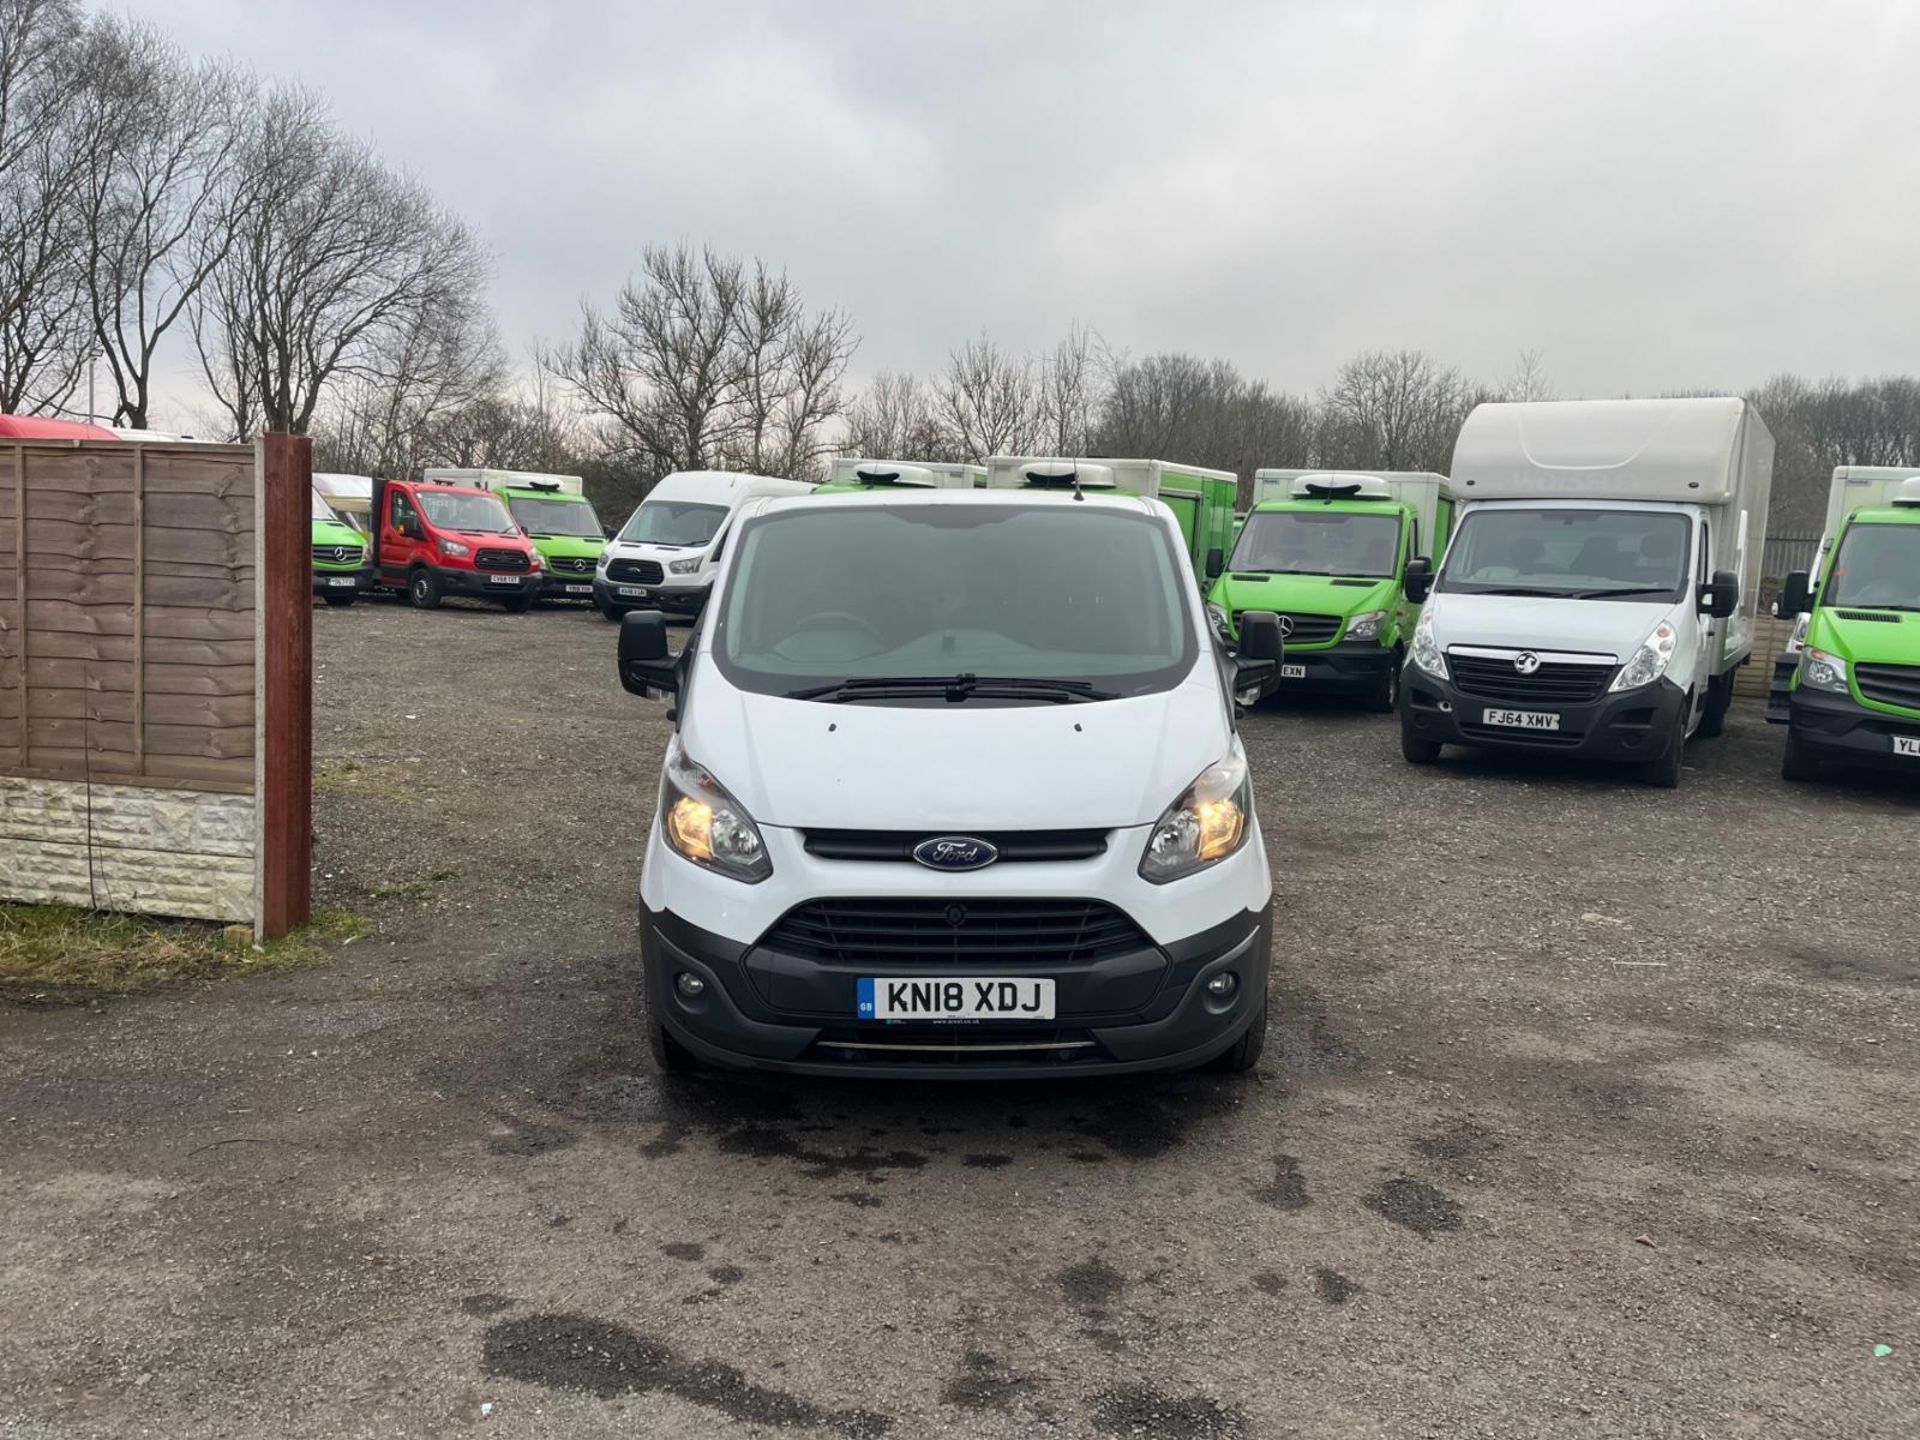 2018 FORD TRANSIT CUSTOM TDCI 130 L1 H1 SWB PANEL VAN - RELIABLE AND EFFICIENT BUSINESS COMPANION - Image 2 of 15